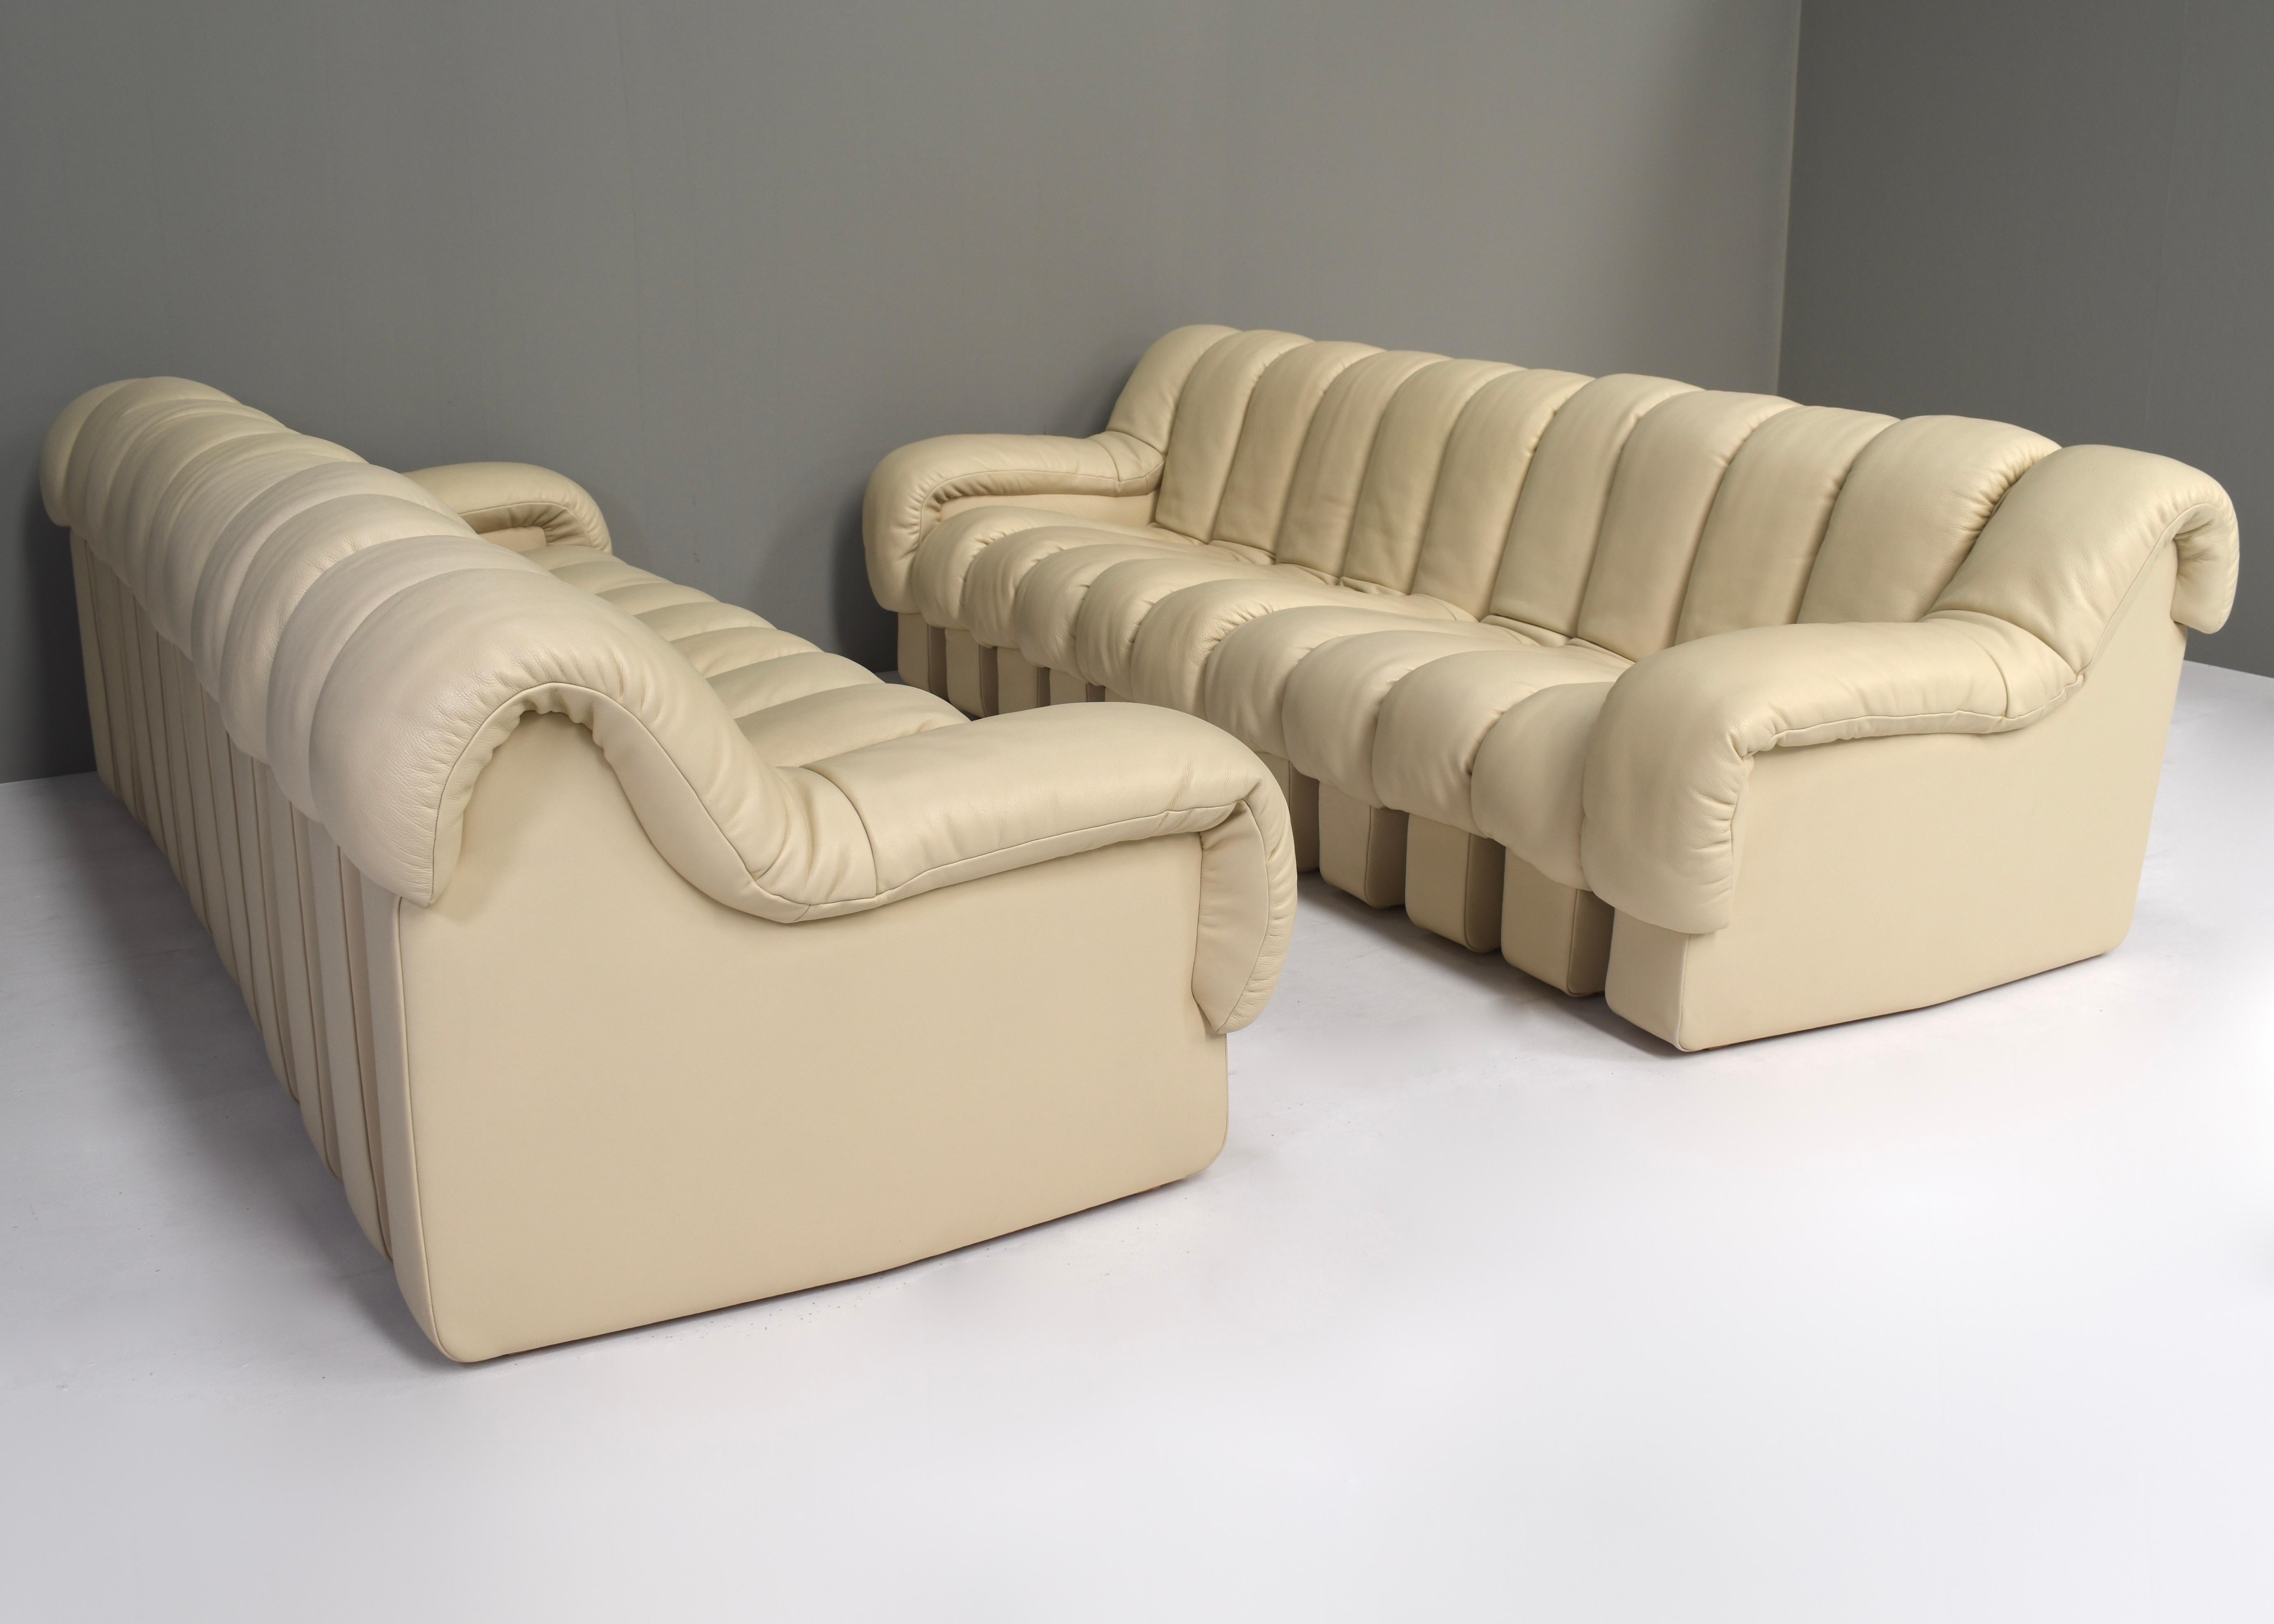 26 Pieces Ds600 Sectional Sofa and Chairs by De Sede in Crème Leather 5